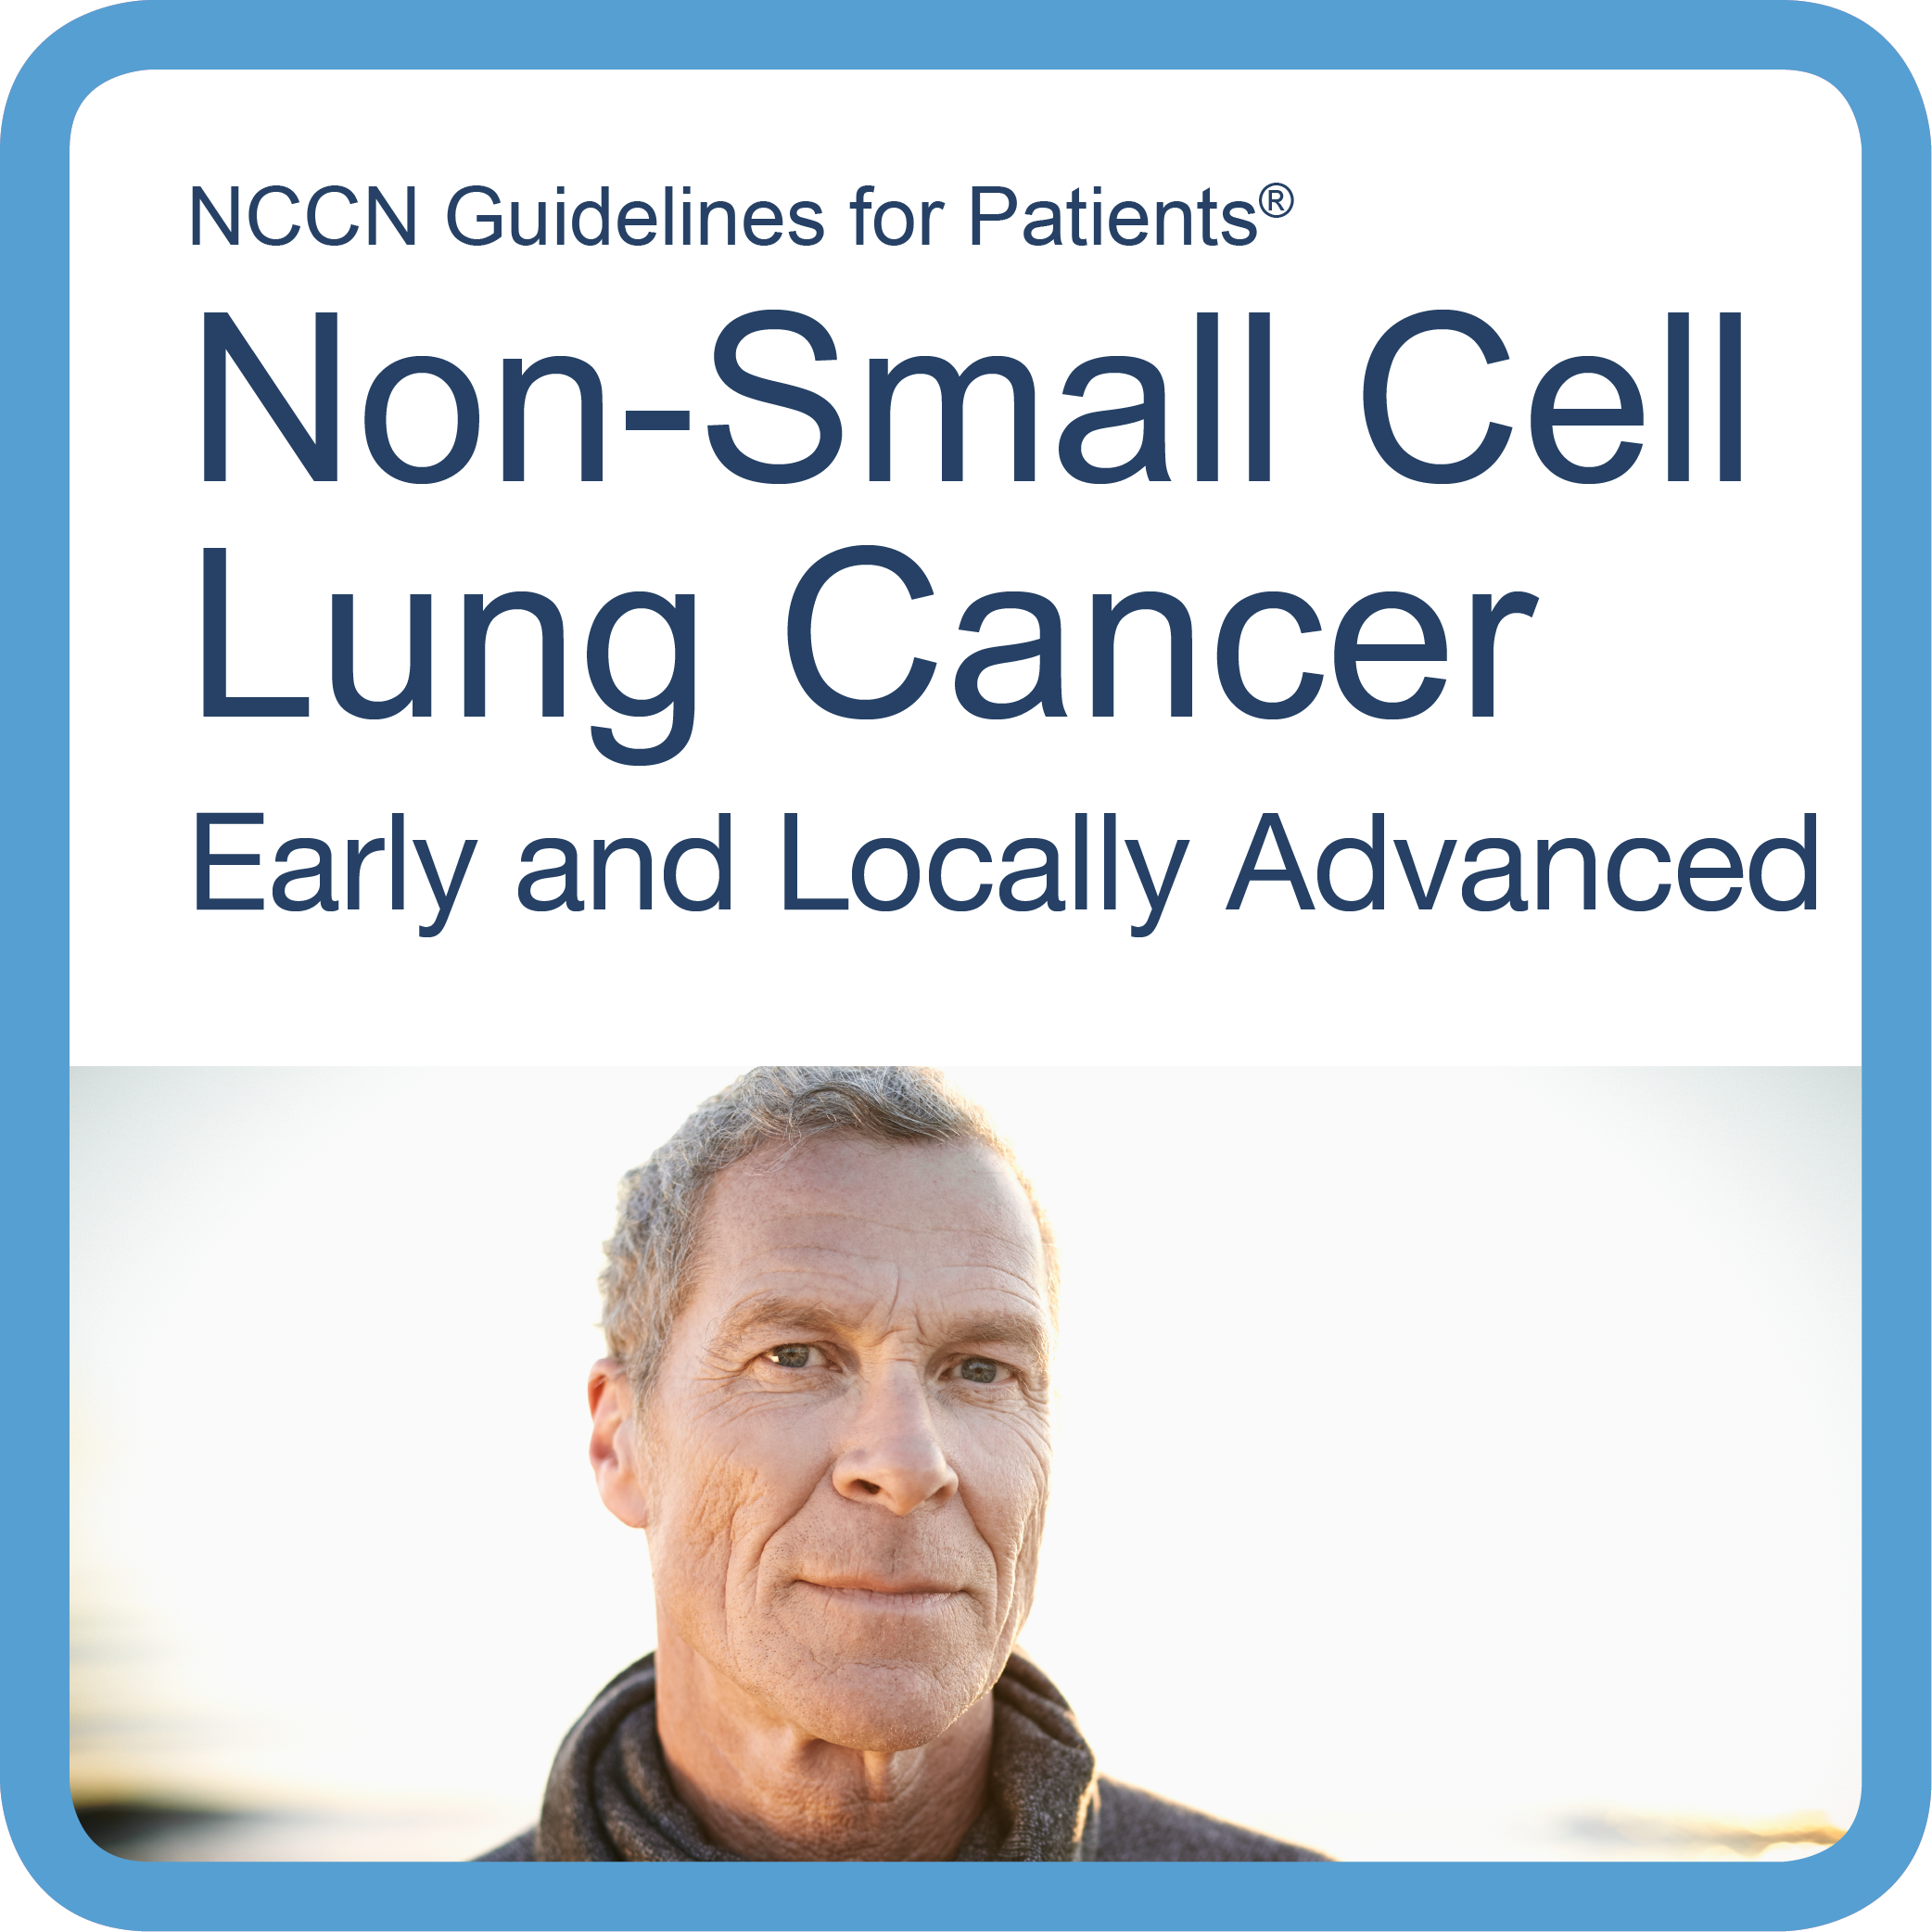 Patient Guidelines for NSCLC- Early and Locally Advanced